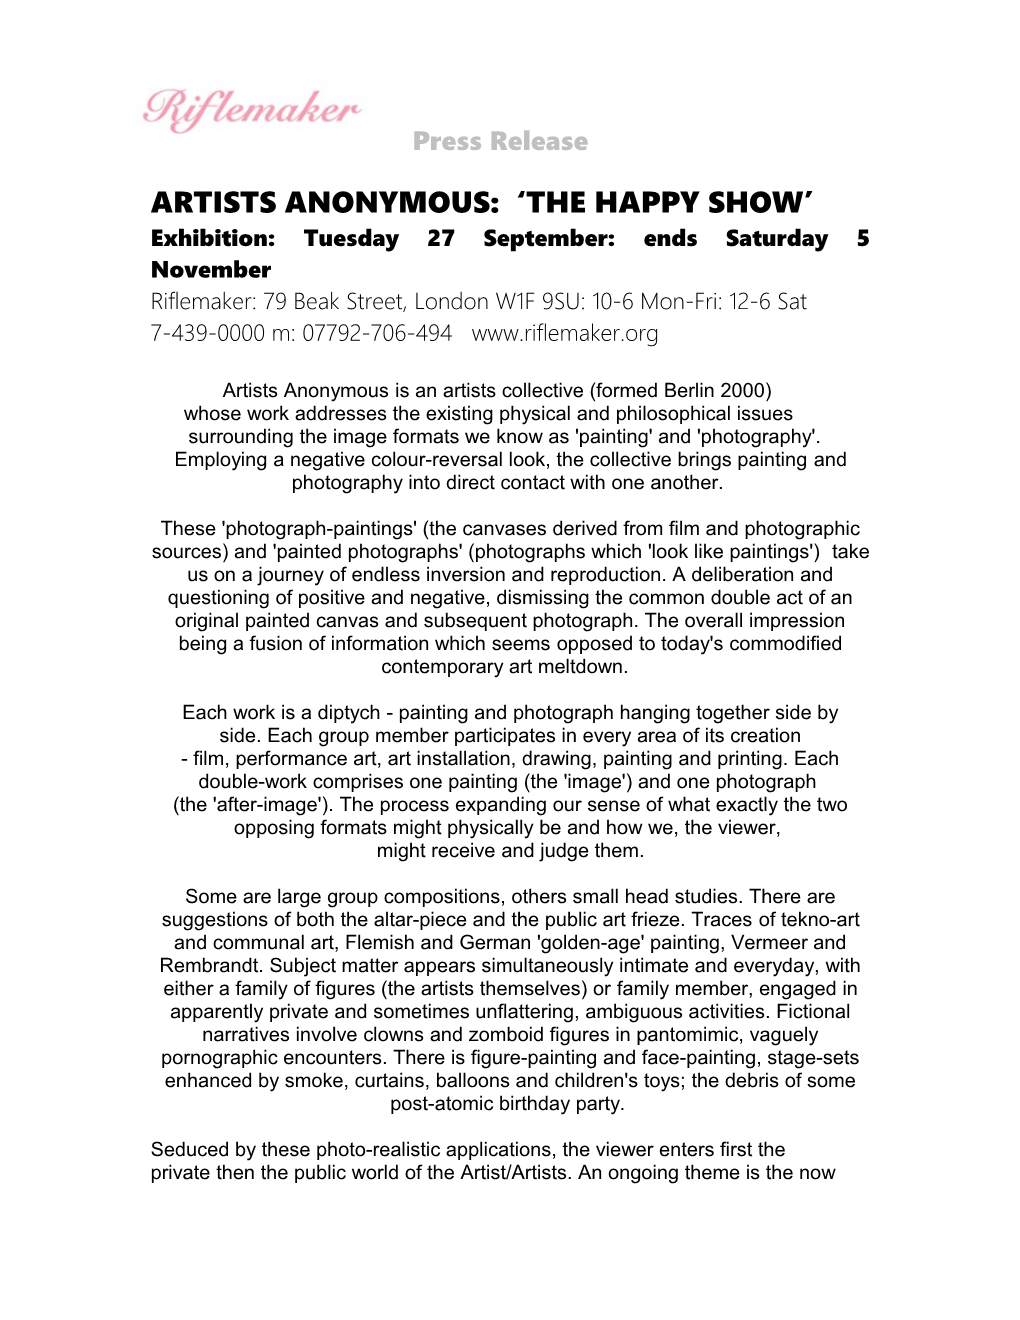 Artists Anonymous: the Happy Show